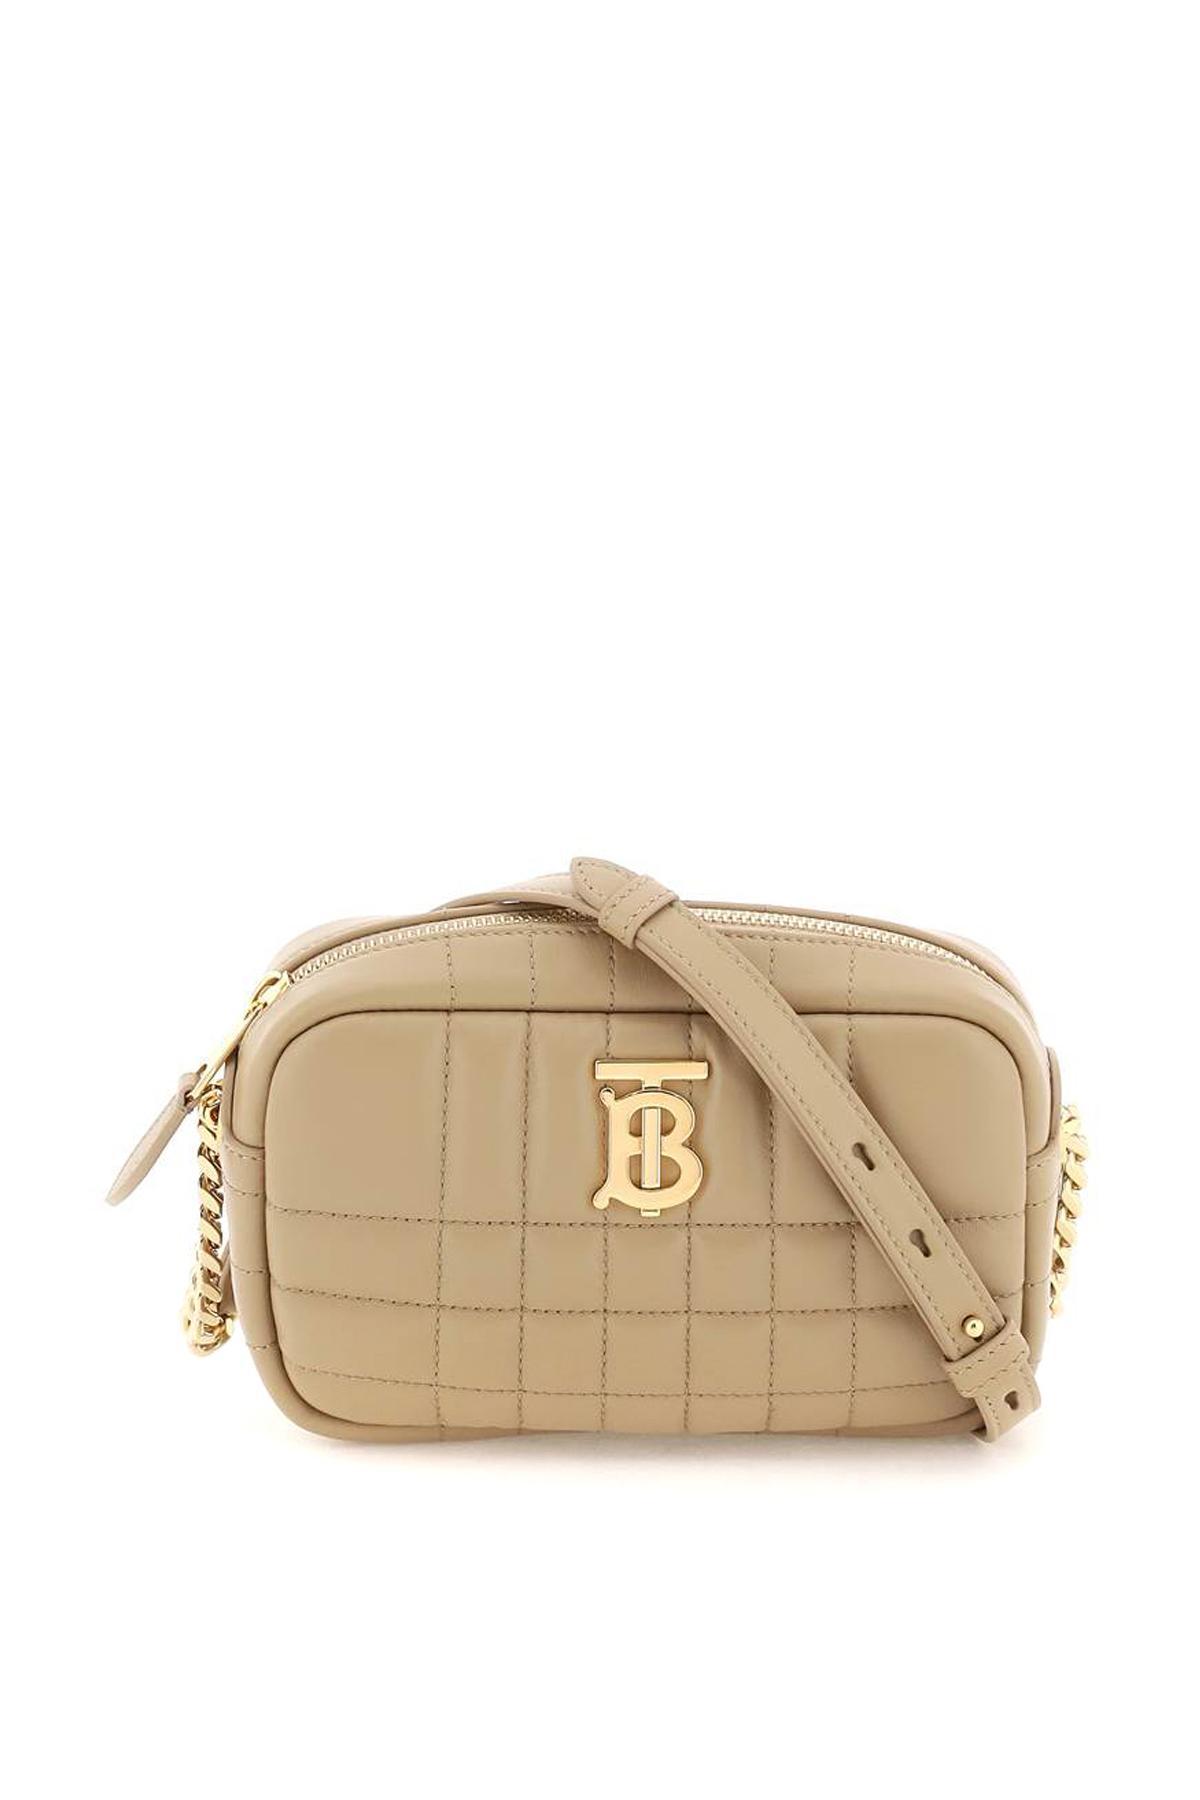 Burberry Small Lola Quilted Leather Camera Bag